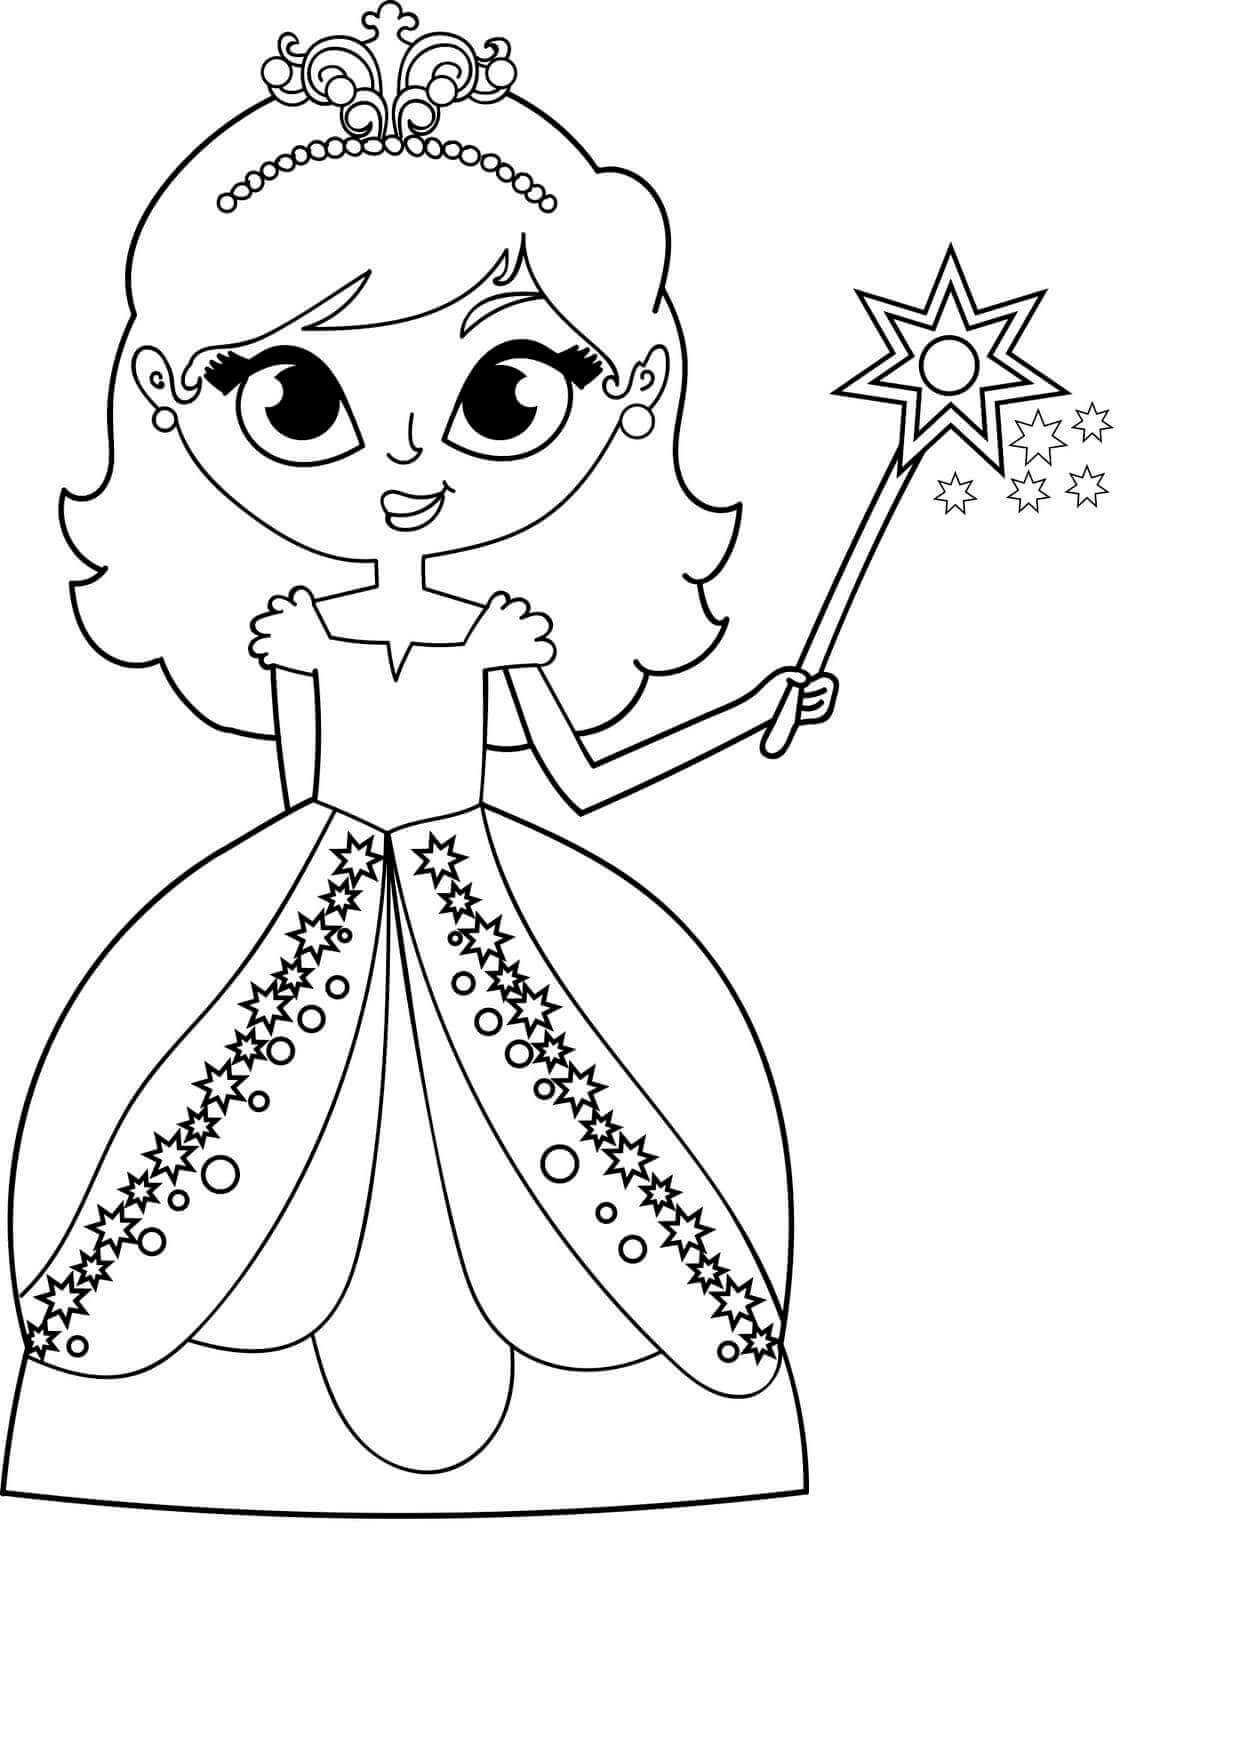 Download Free Printable Coloring Pages For Girls